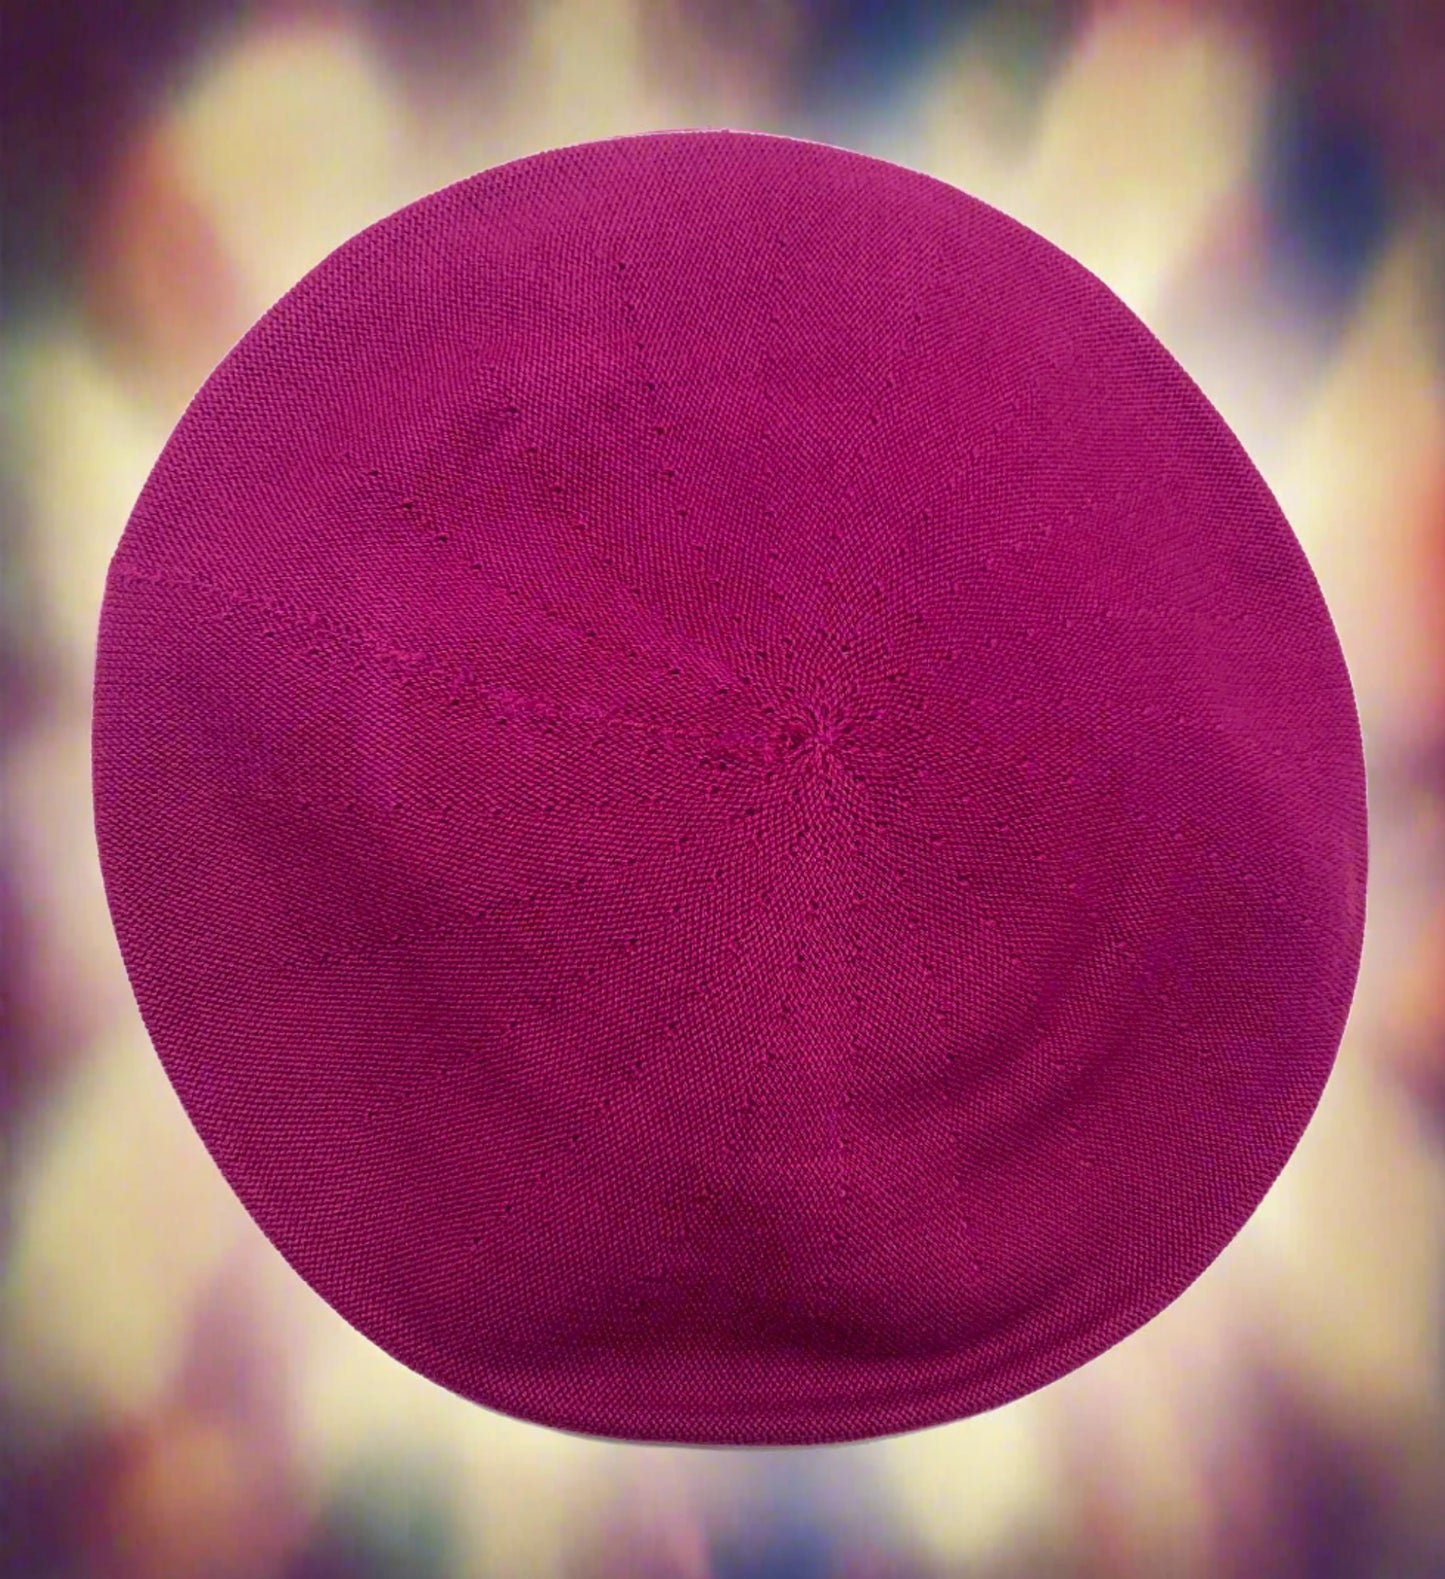 *Raspberry Cotton Classic French Beret, NEW! "The kind you find in a Secondhand Store", PARKHURST BERETS, Made In Canada, #30017